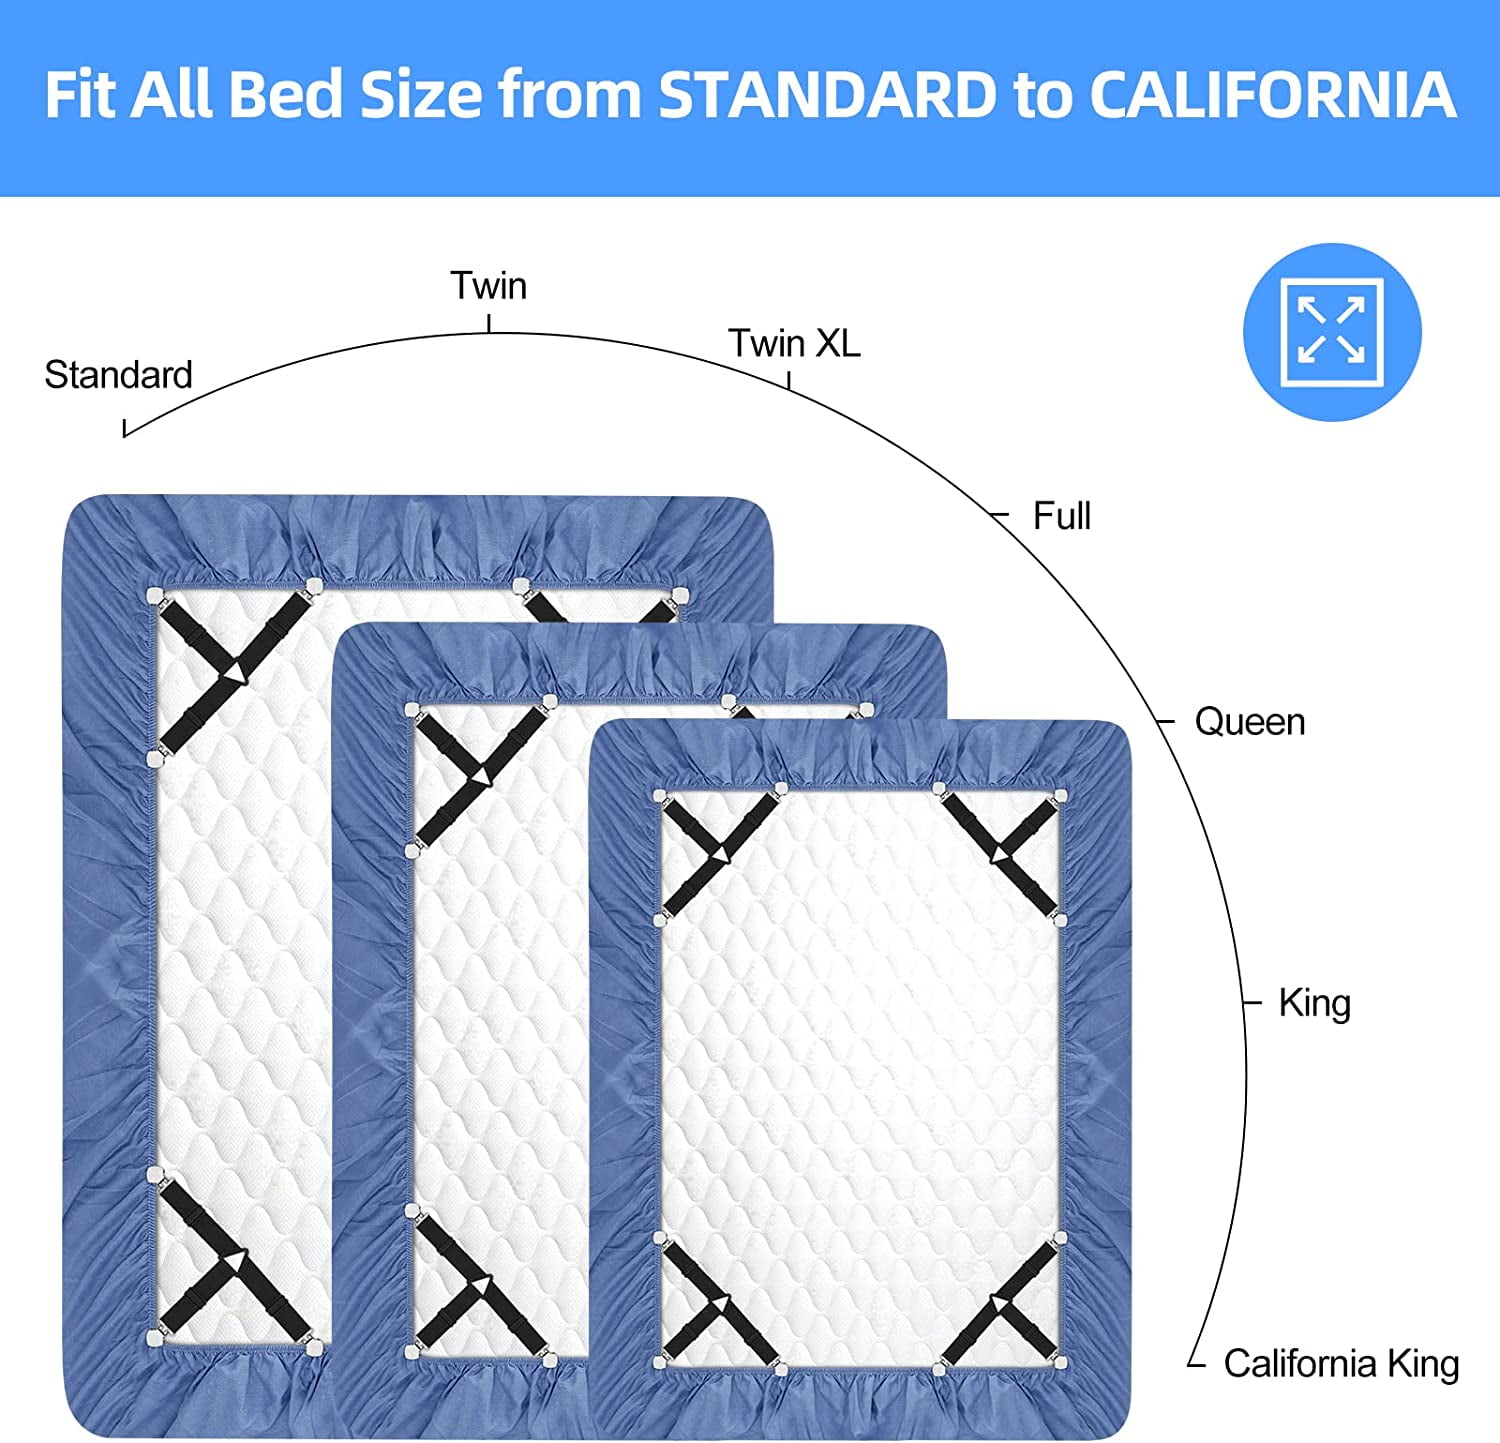 Bed Sheet Holder Grippers Straps Suspenders Elastic Fasteners 4Pcs - 7.5 x  1(L*W) - Bed Bath & Beyond - 28817951